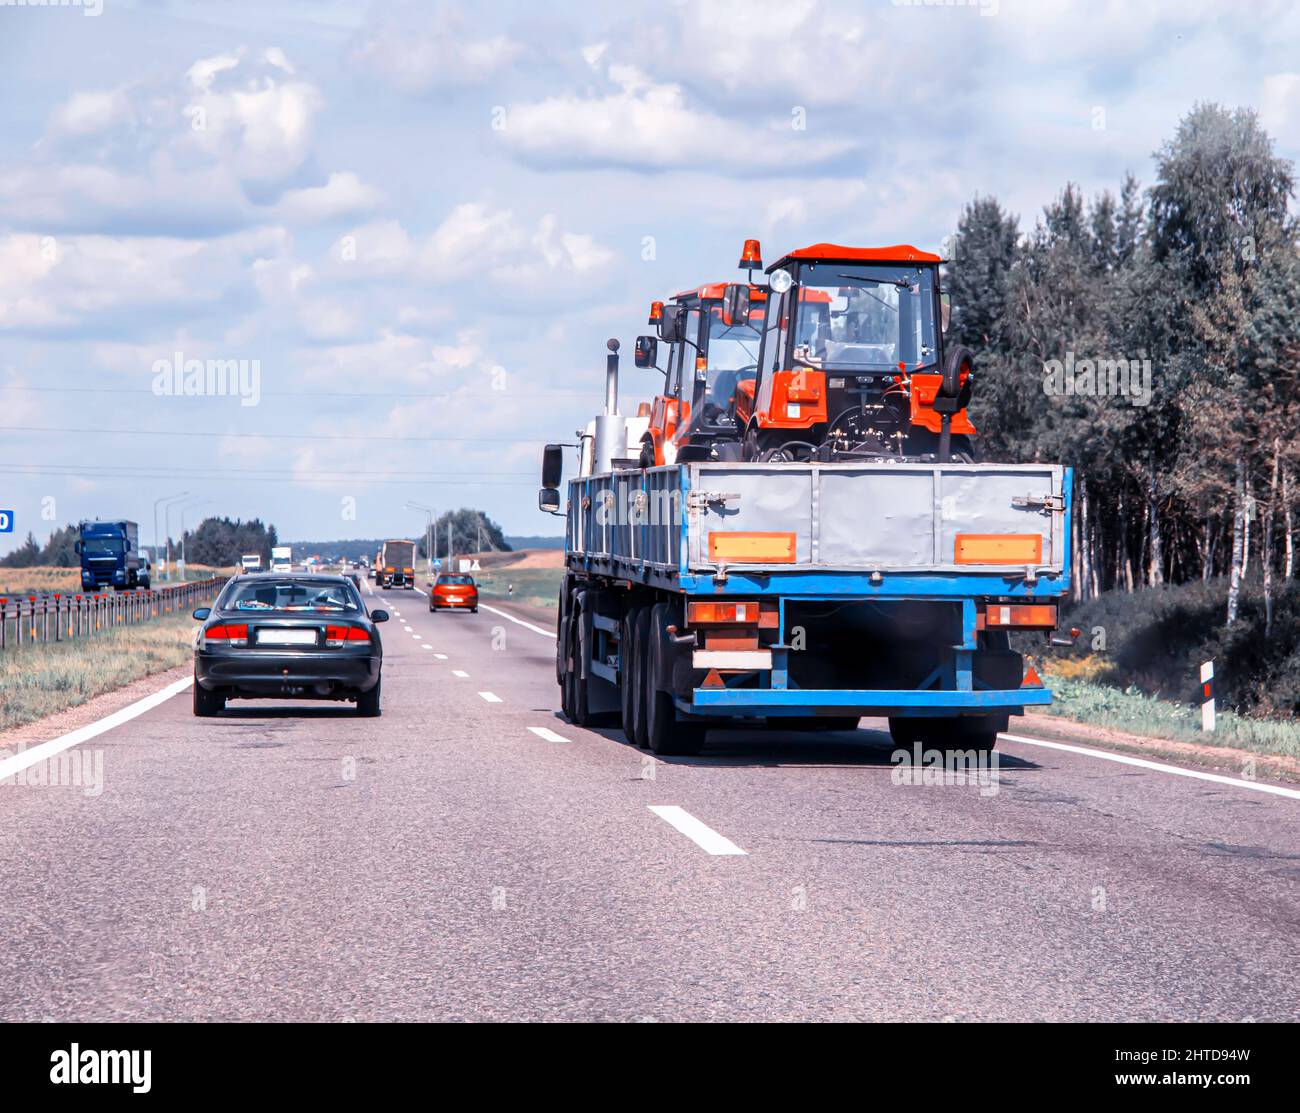 Transporting new tractors in a truck trailer on the road. Oversized cargo transportation, industry Stock Photo